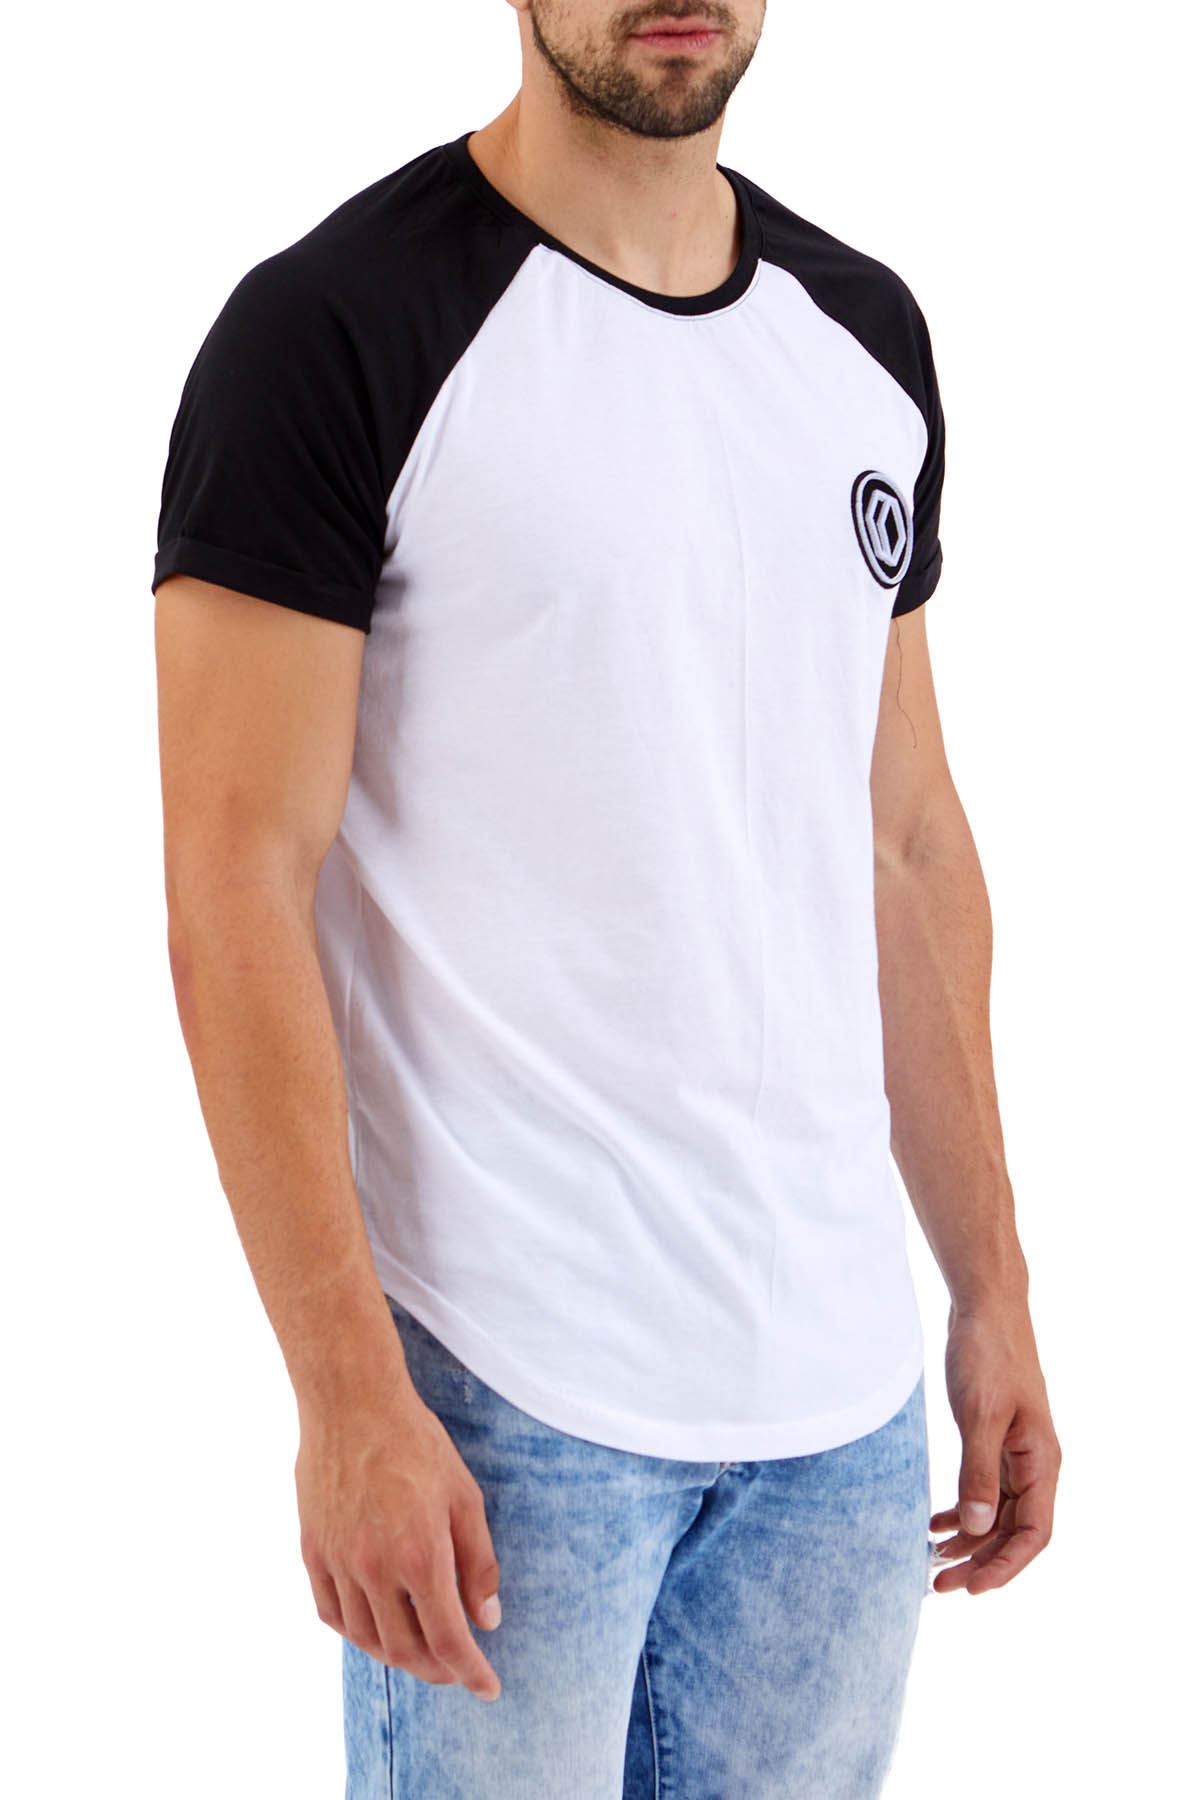 T-shirt White with Black Sleeves